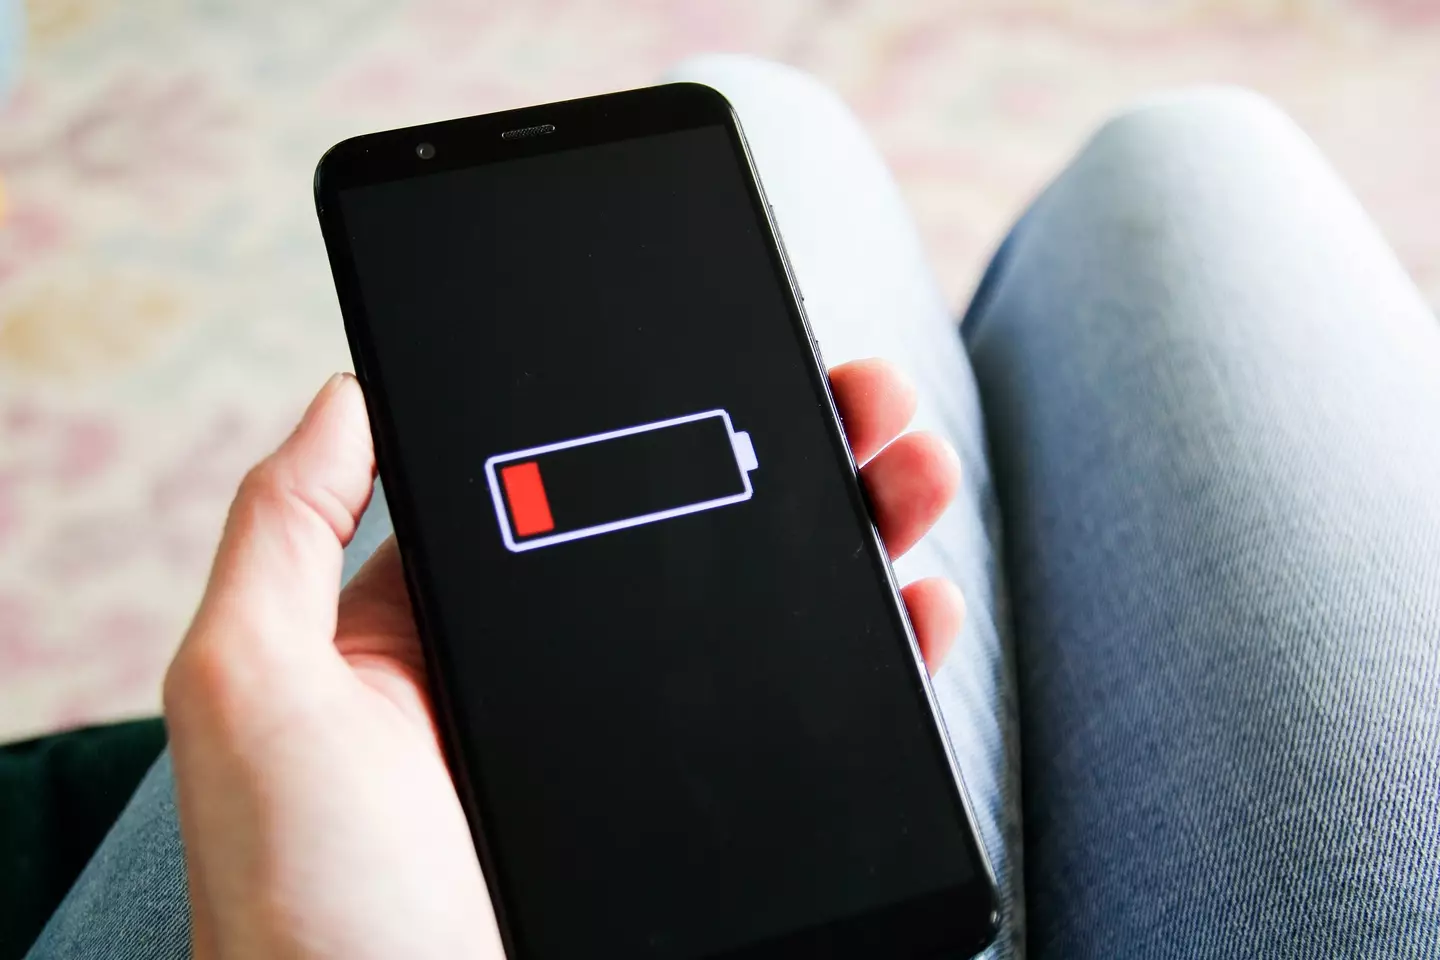 Low battery could be a warning sign.